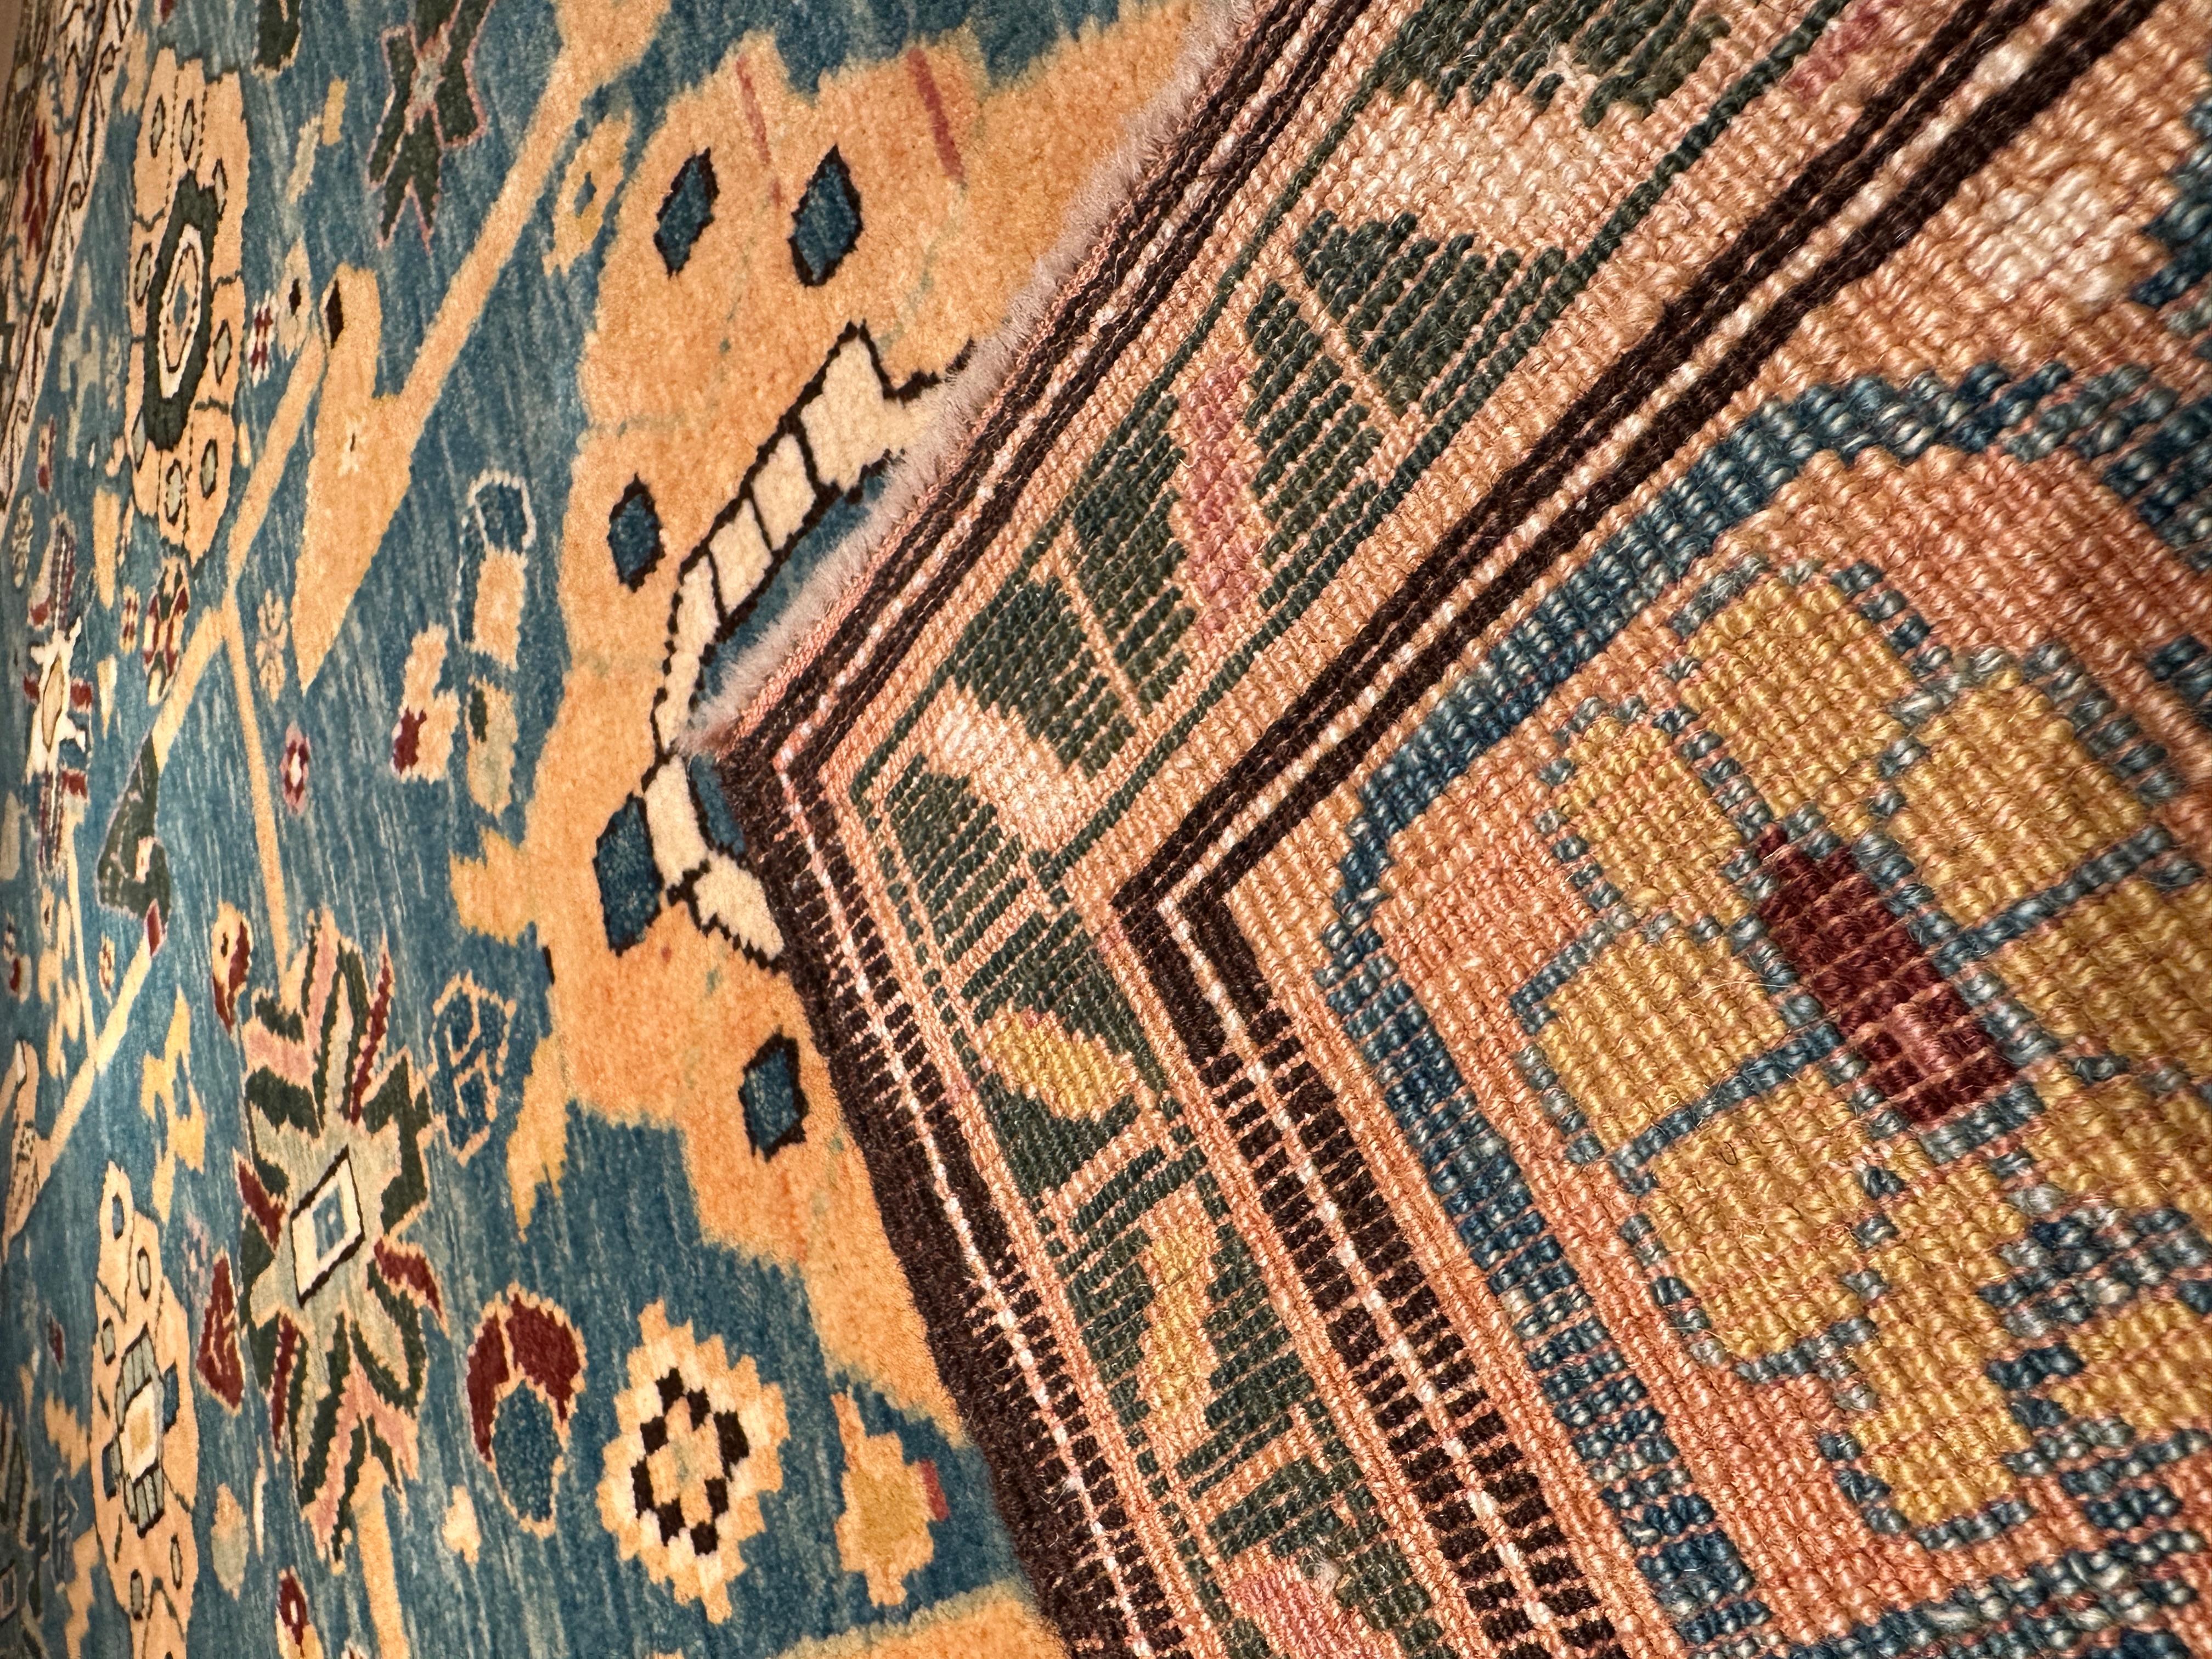 The source of the rug comes from the book oriental rugs volume 1 Caucasian, Ian Bennett, Oriental Textile Press, Aberdeen 1993, nr.250-251. This is a floral composition lattice rug from the late 19th century, Karabakh region, Caucasus area. This